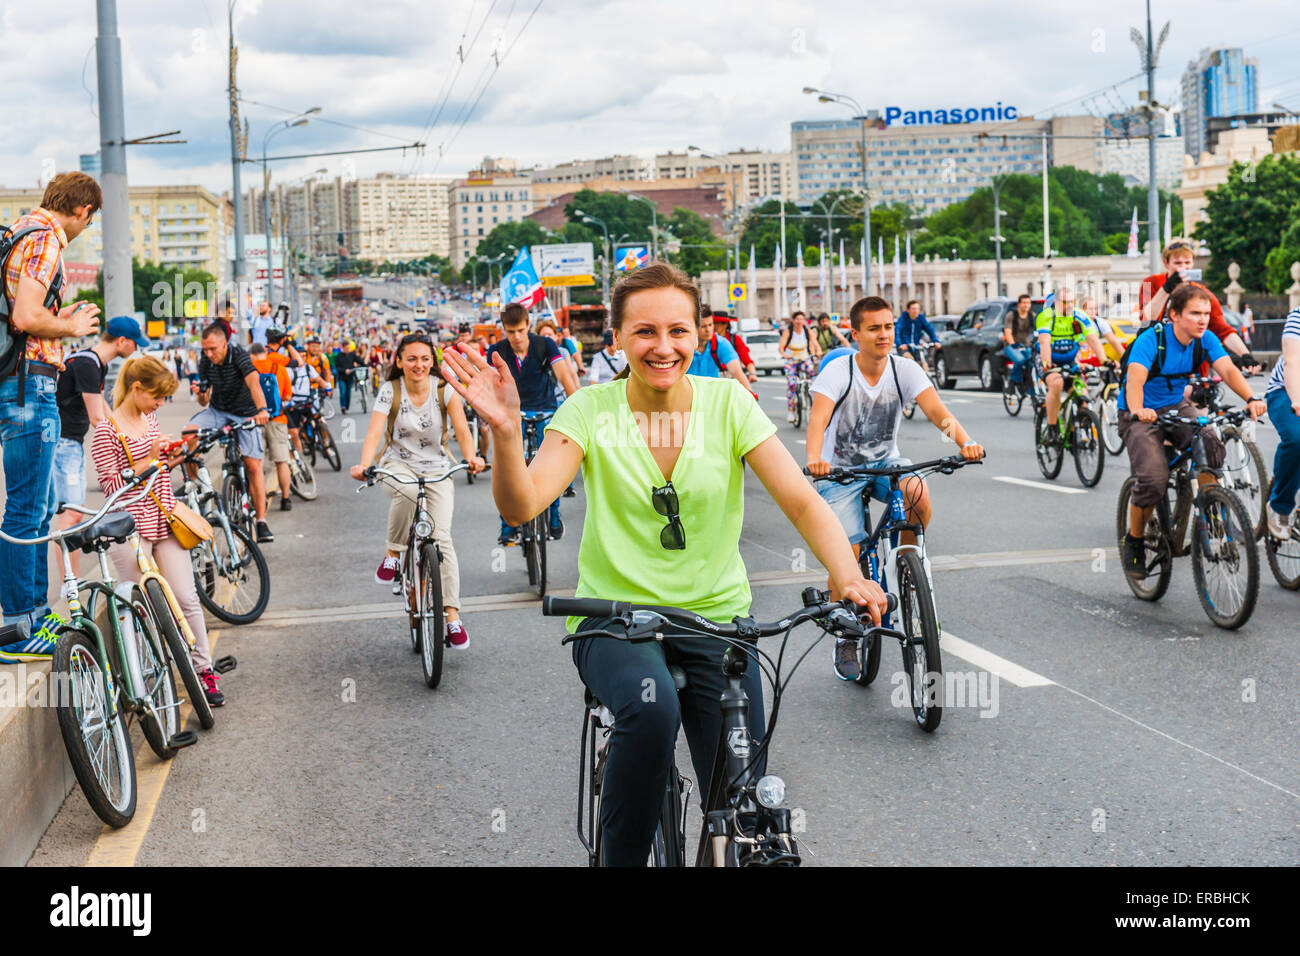 Moscow, Russia, Sunday, May 31st, 2015. 5th annual Moscow Bike Parade. The parade was organized by the Let's Bike It! project to promote the development of the bicycle infrastructure and road traffic safety in the city. Hello! Credit:  Alex's Pictures/Alamy Live News Stock Photo